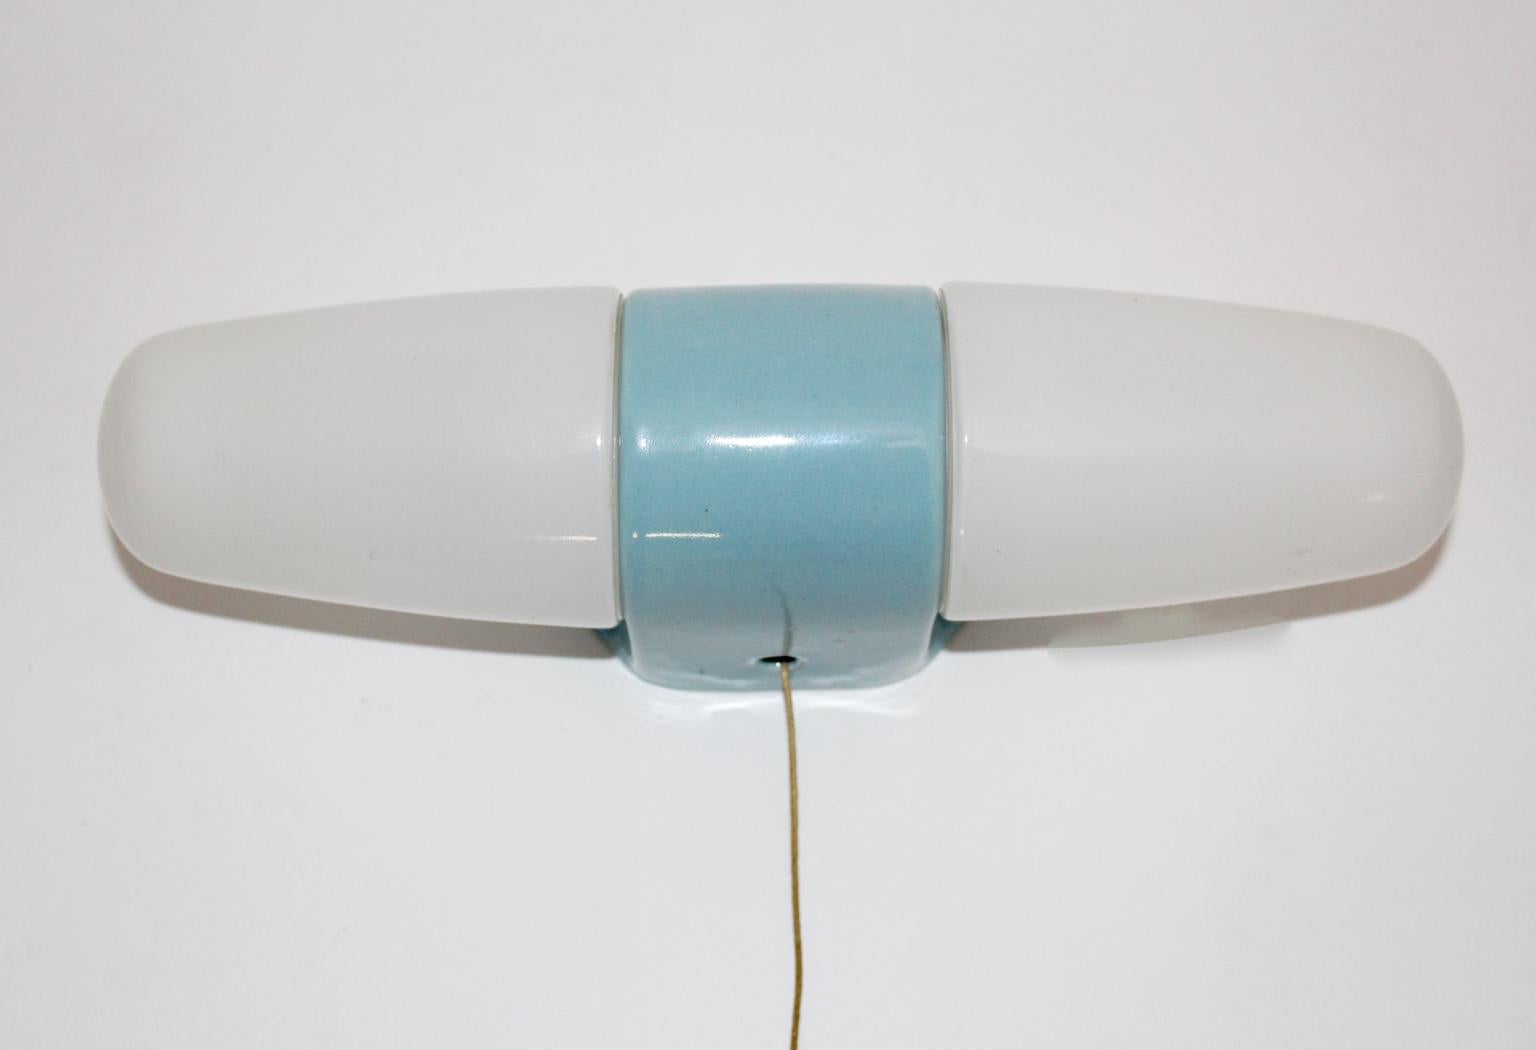 This presented sconce or wall light was planned to use it above a mirror.
It was designed by Wilhelm Wagenfeld and produced by Lindner, Germany, circa 1956.
Also the sconce was made of light blue porcelain with two E 14 sockets and two opaline